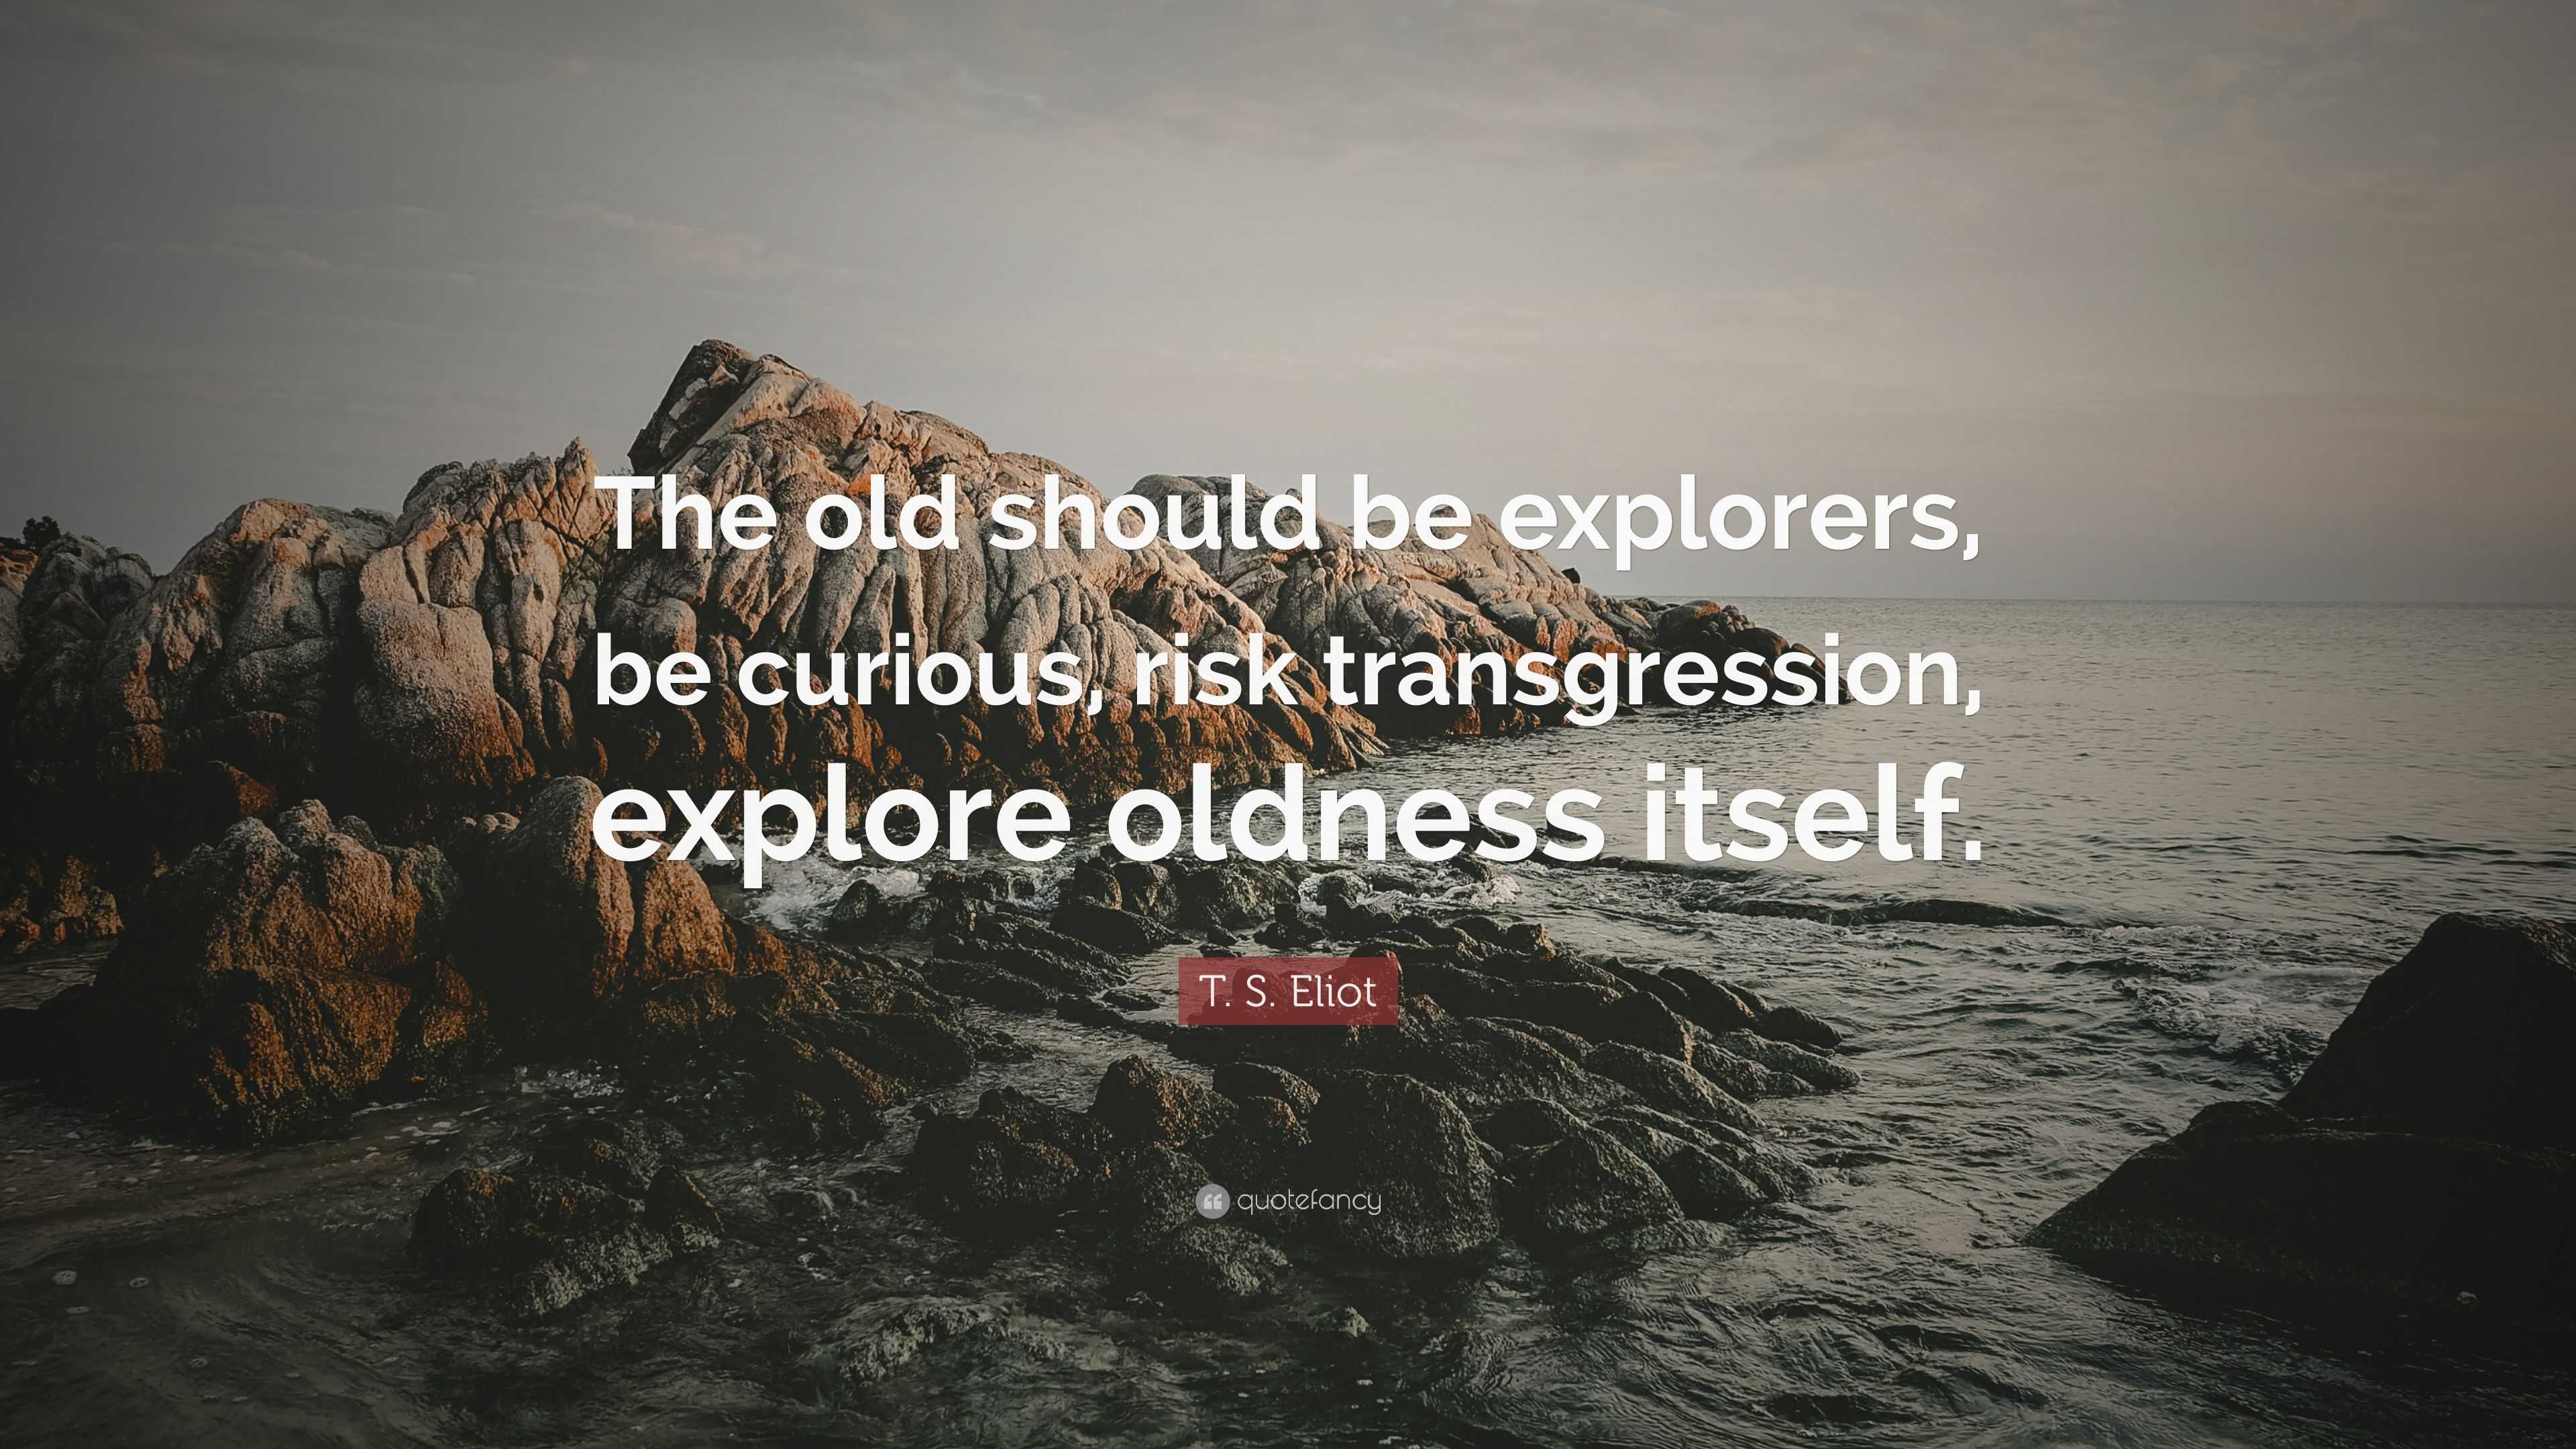 T. S. Eliot Quote “The old should be explorers, be curious, risk